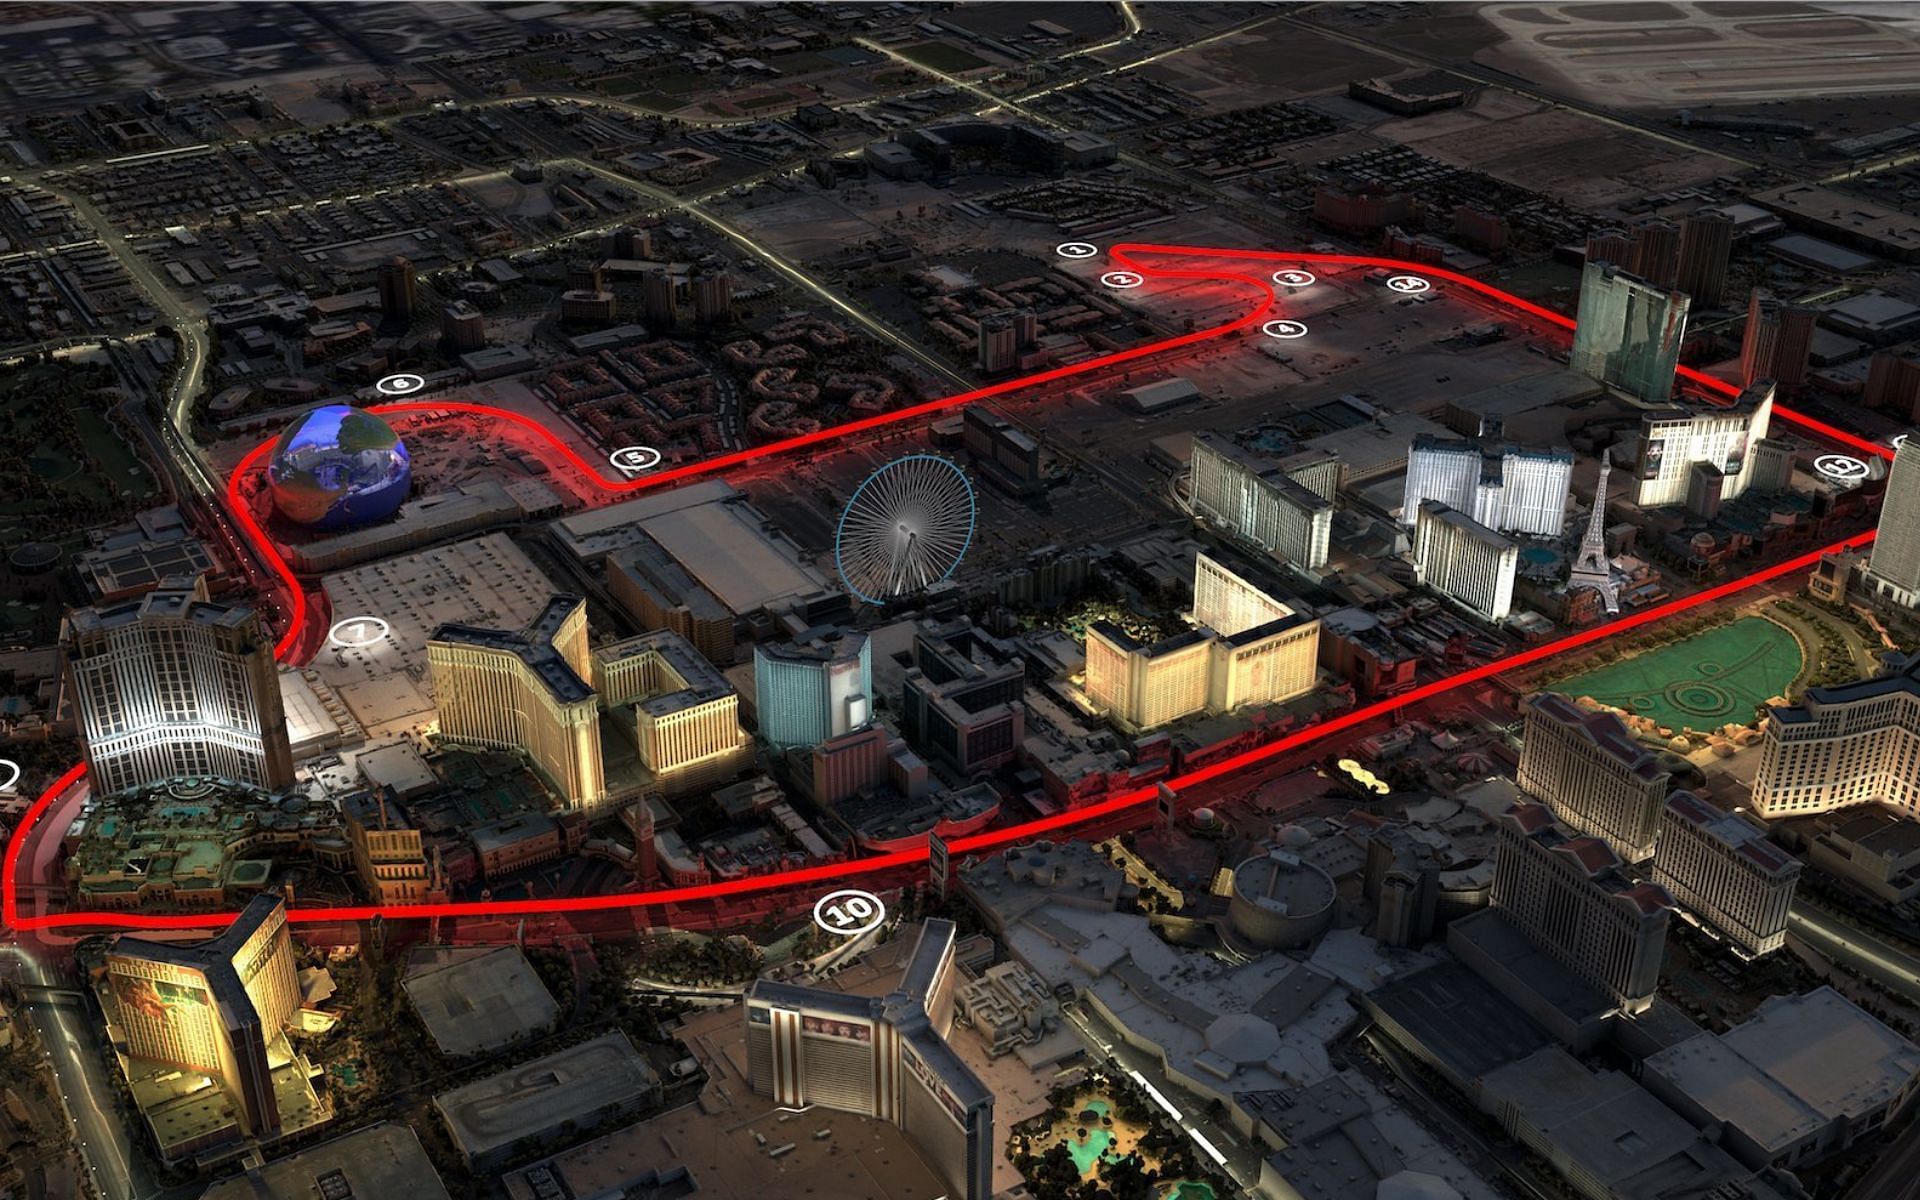 The upcoming F1 circuit in Las Vegas (Image credits: Twitter/@WTF1)